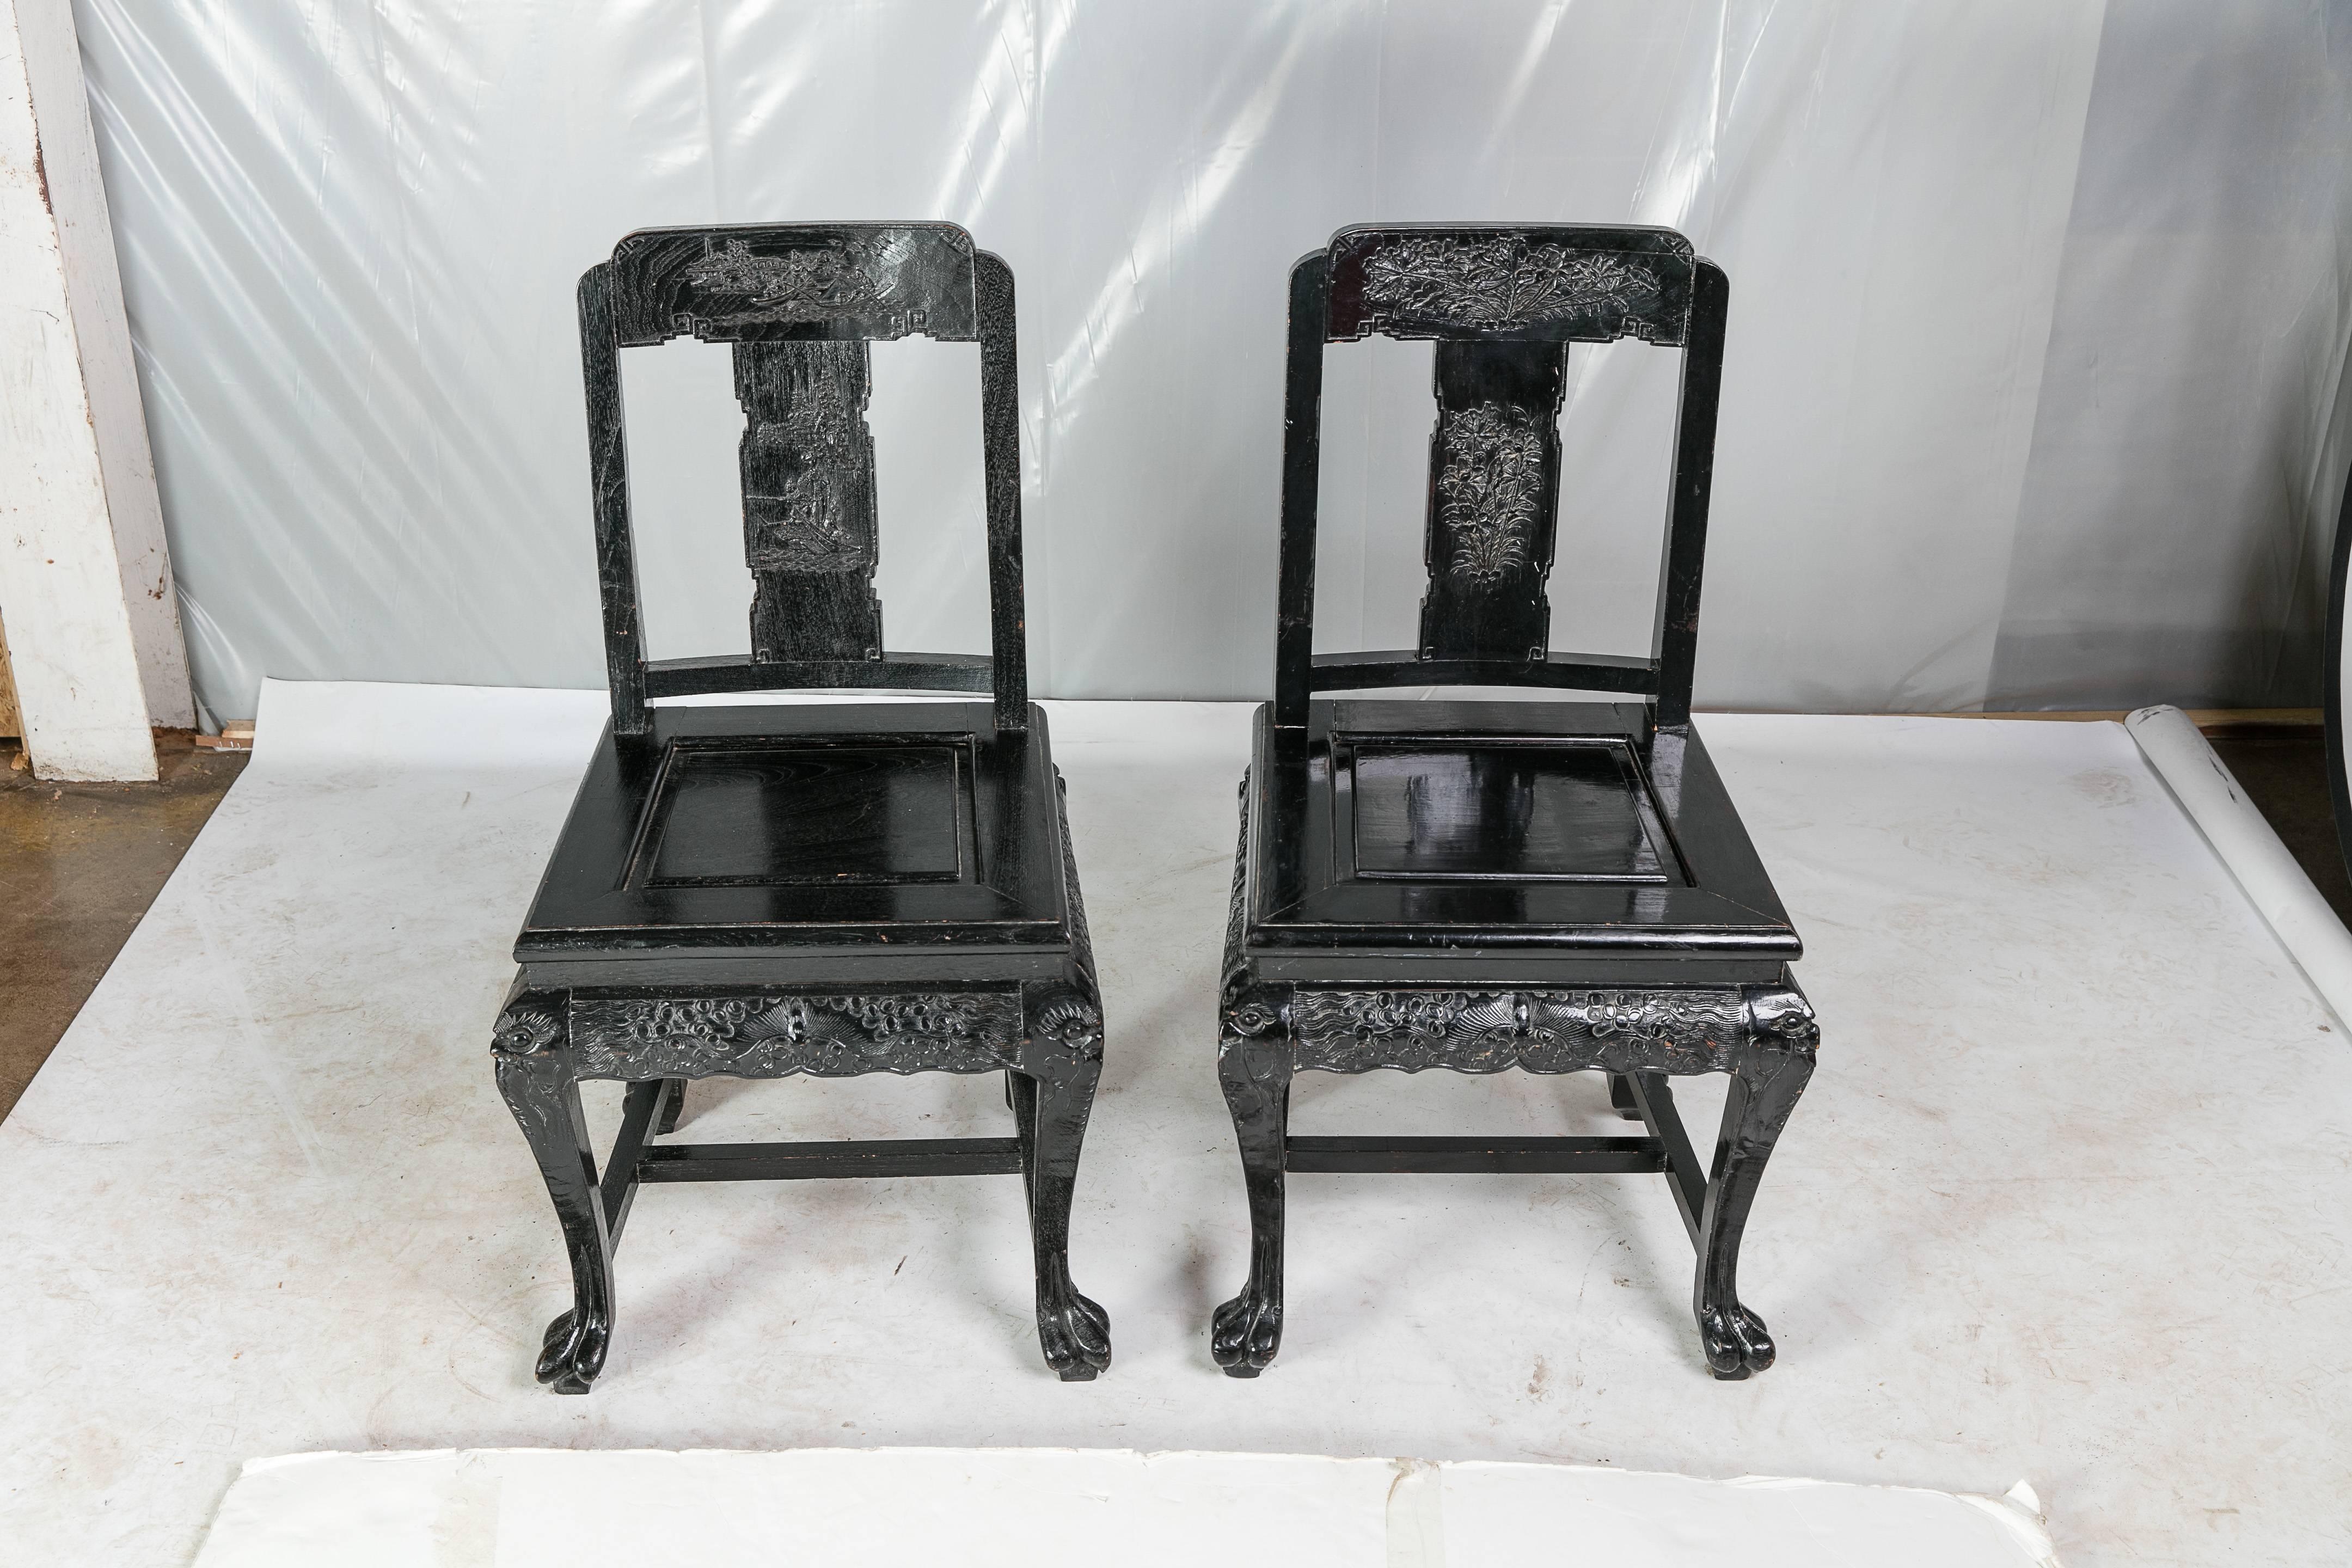 A beautiful pair of carved Chinese wood hall chairs by George Zee of Hong Kong. The chairs are circa 1950s and feature a black-painted finish. Each chair has heavily carved legs, skirt, and back. See photos for more detail on carvings. The back of